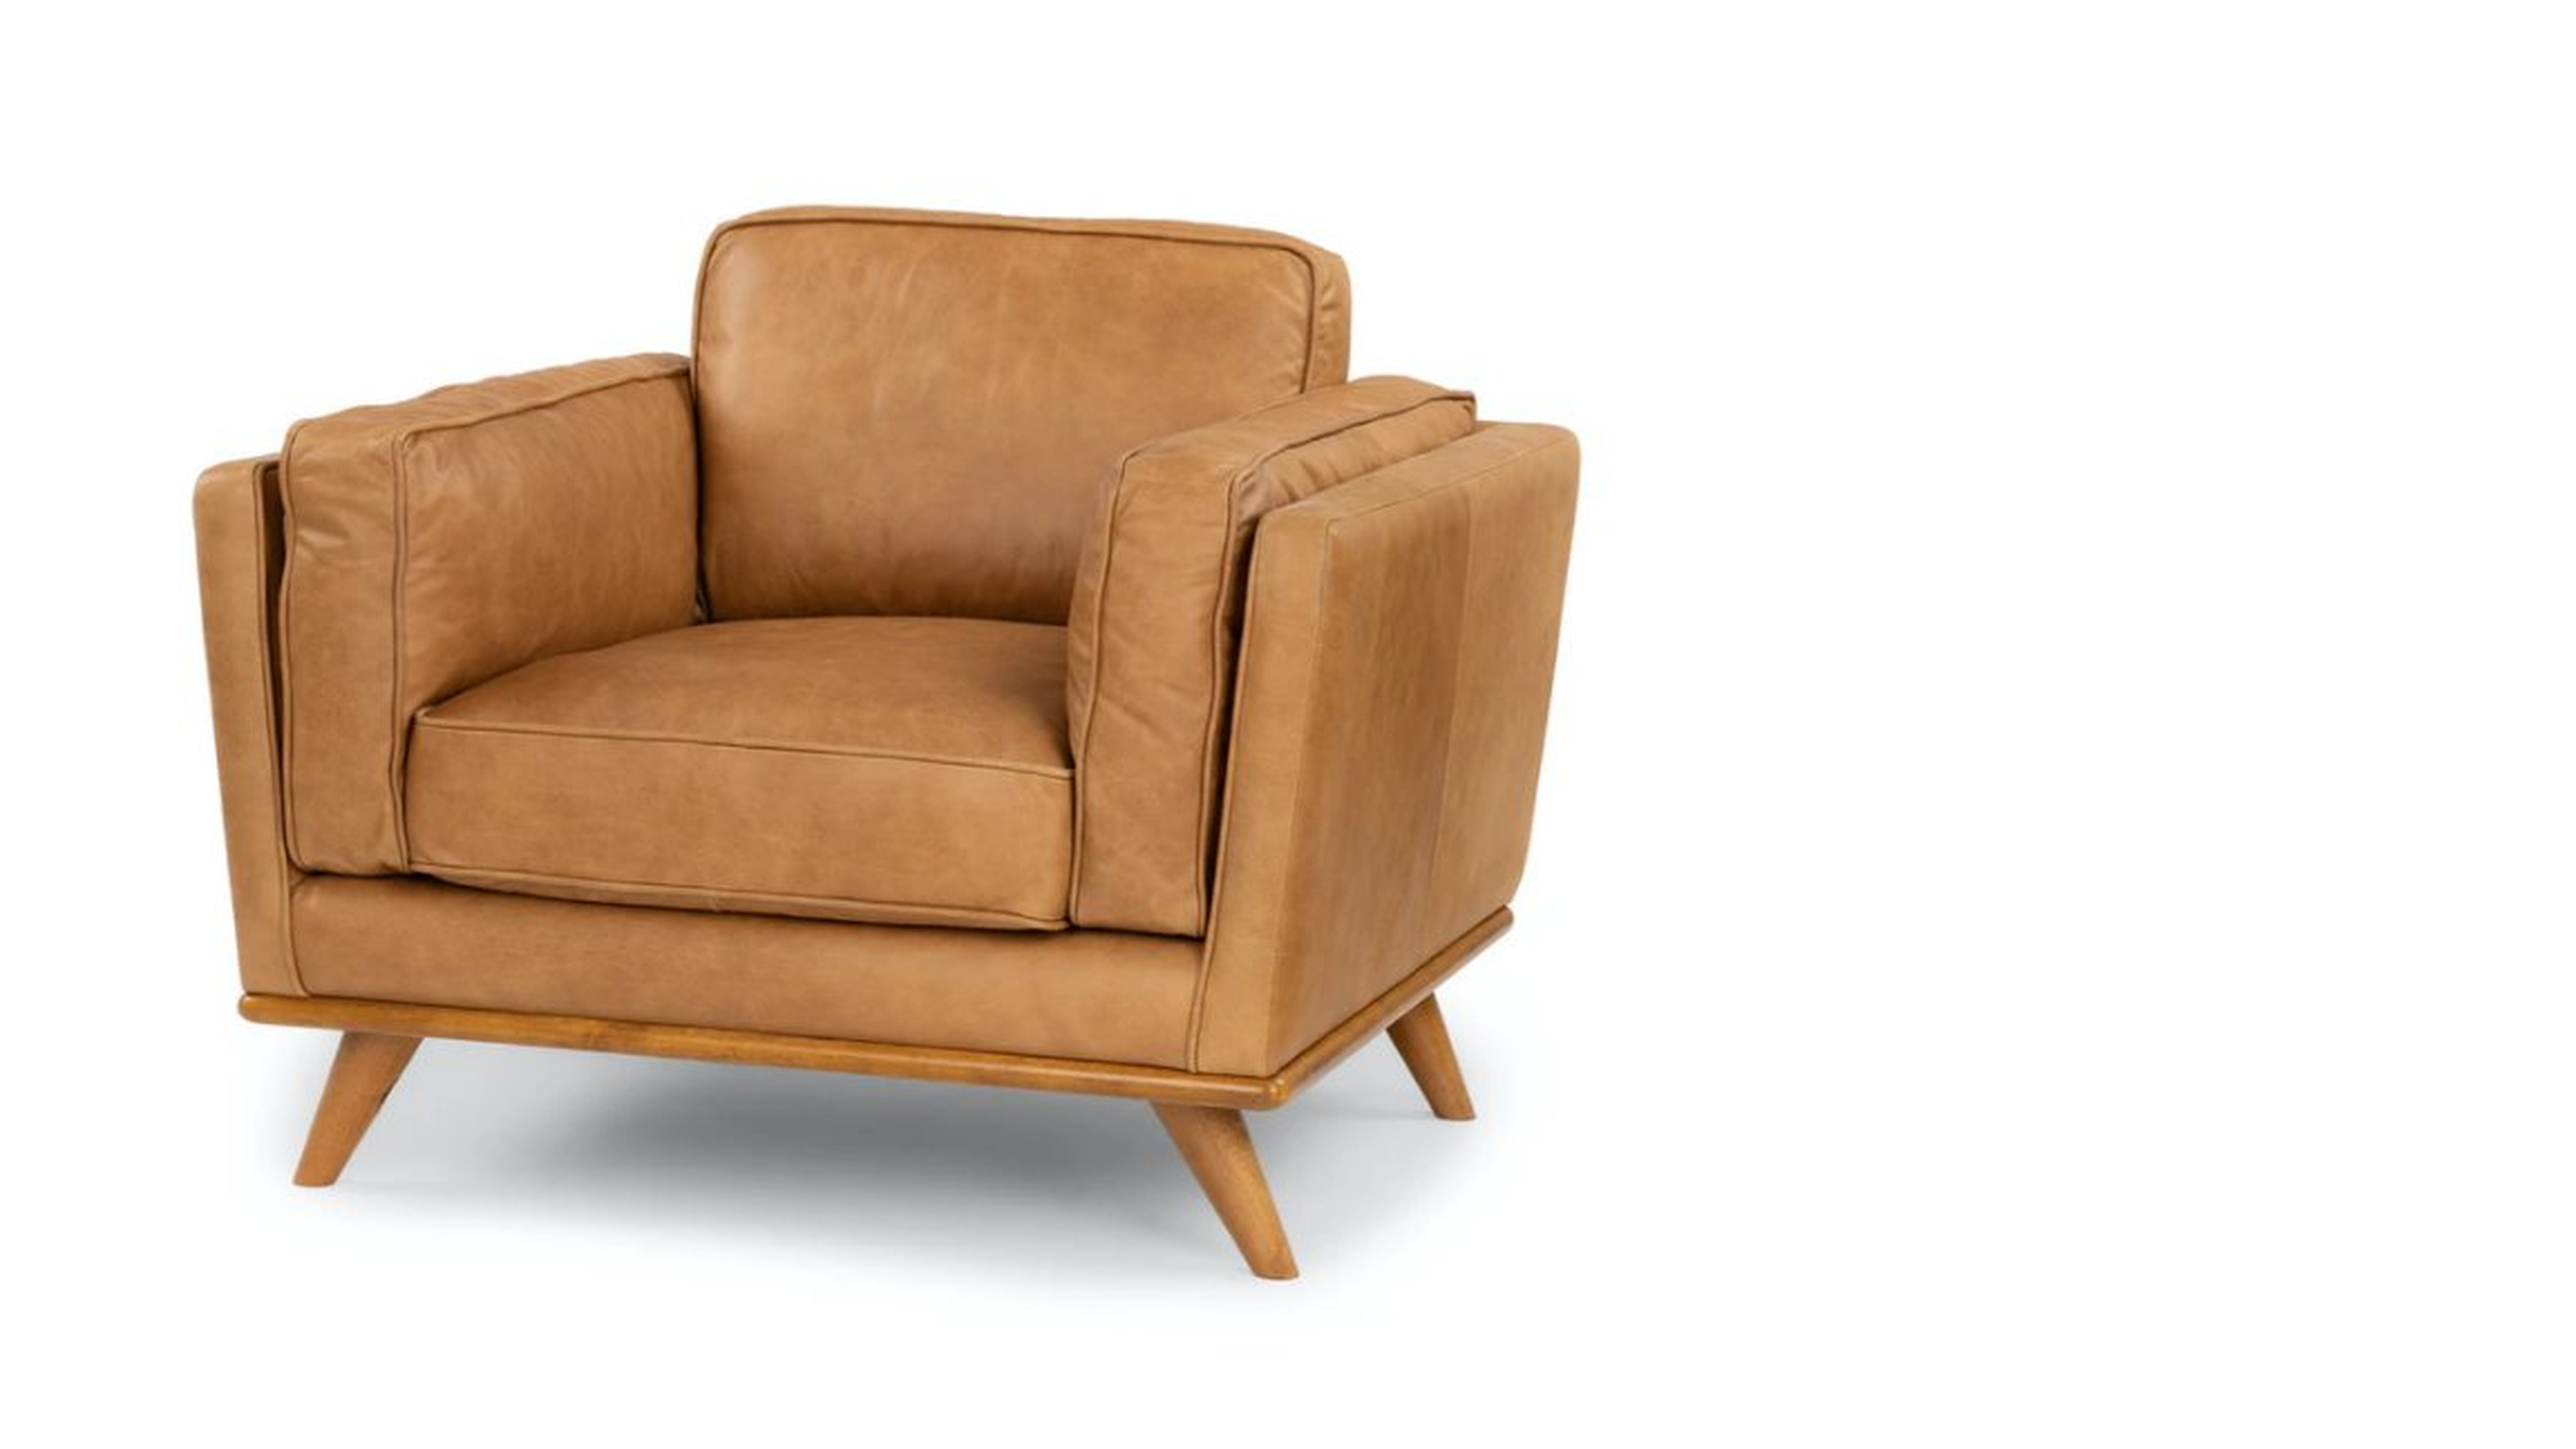 Timber Charme Tan Leather Armchair - Article